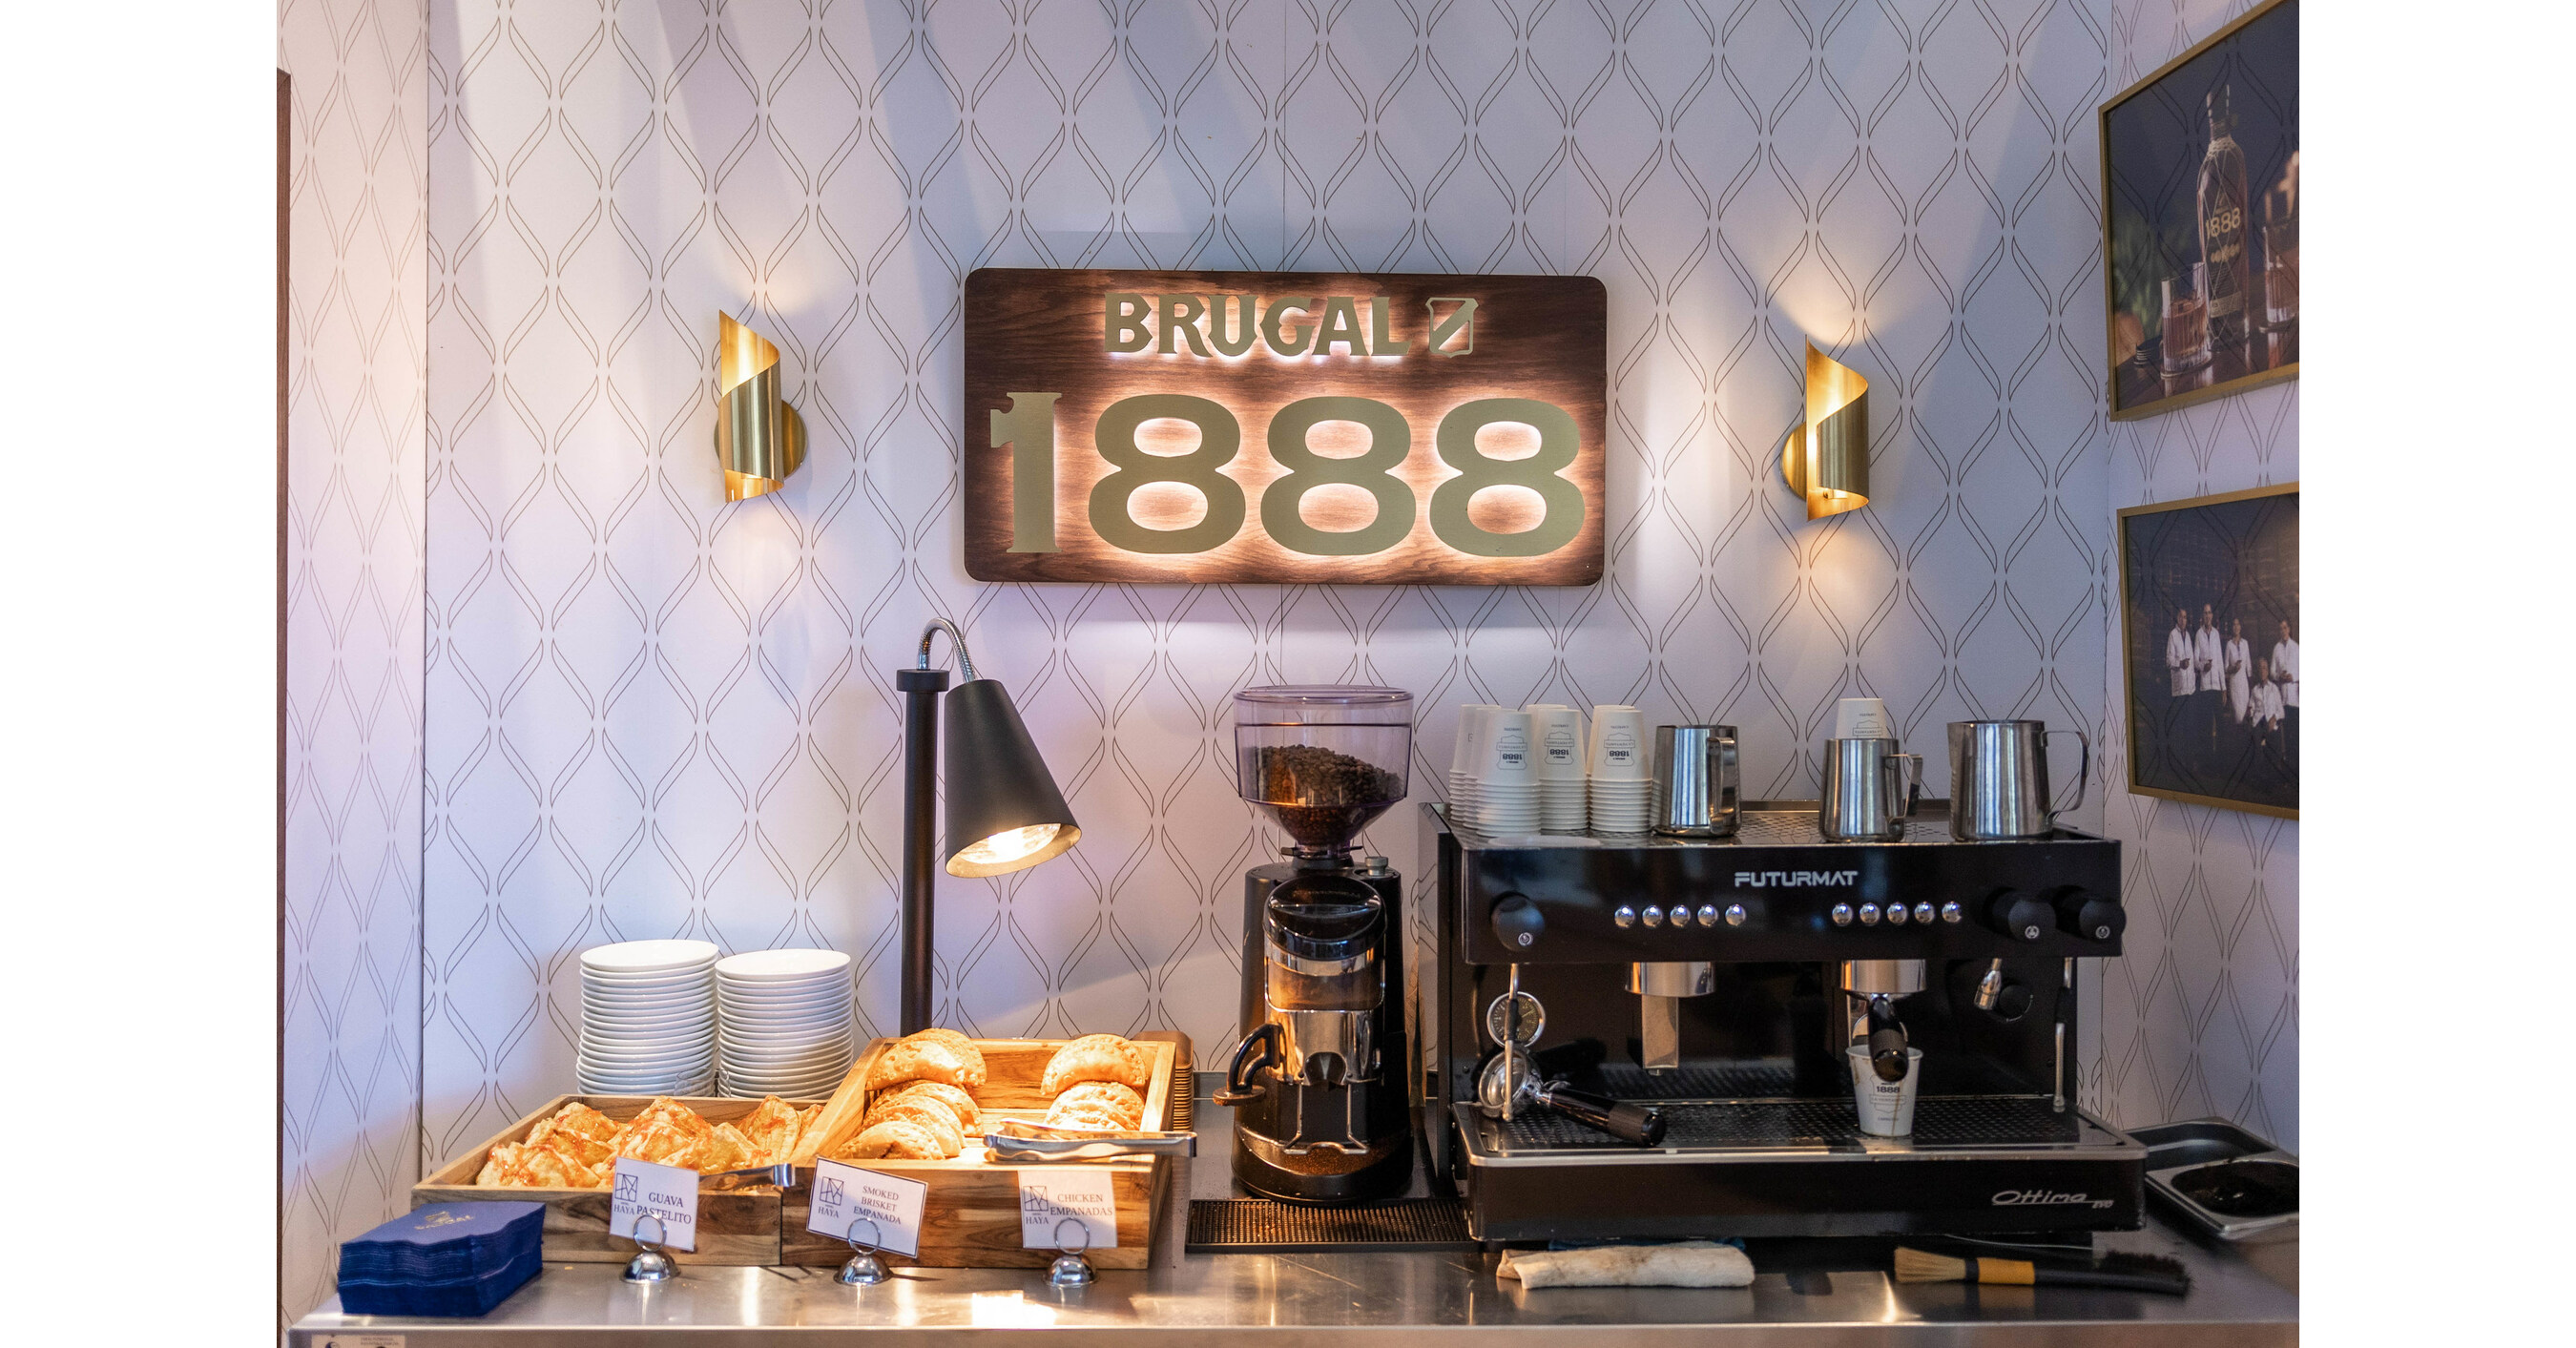 Brugal 1888 Announces the Return of 'Wonders Await at La Ventanita' With  New Mobile Experience Journeying Across Florida